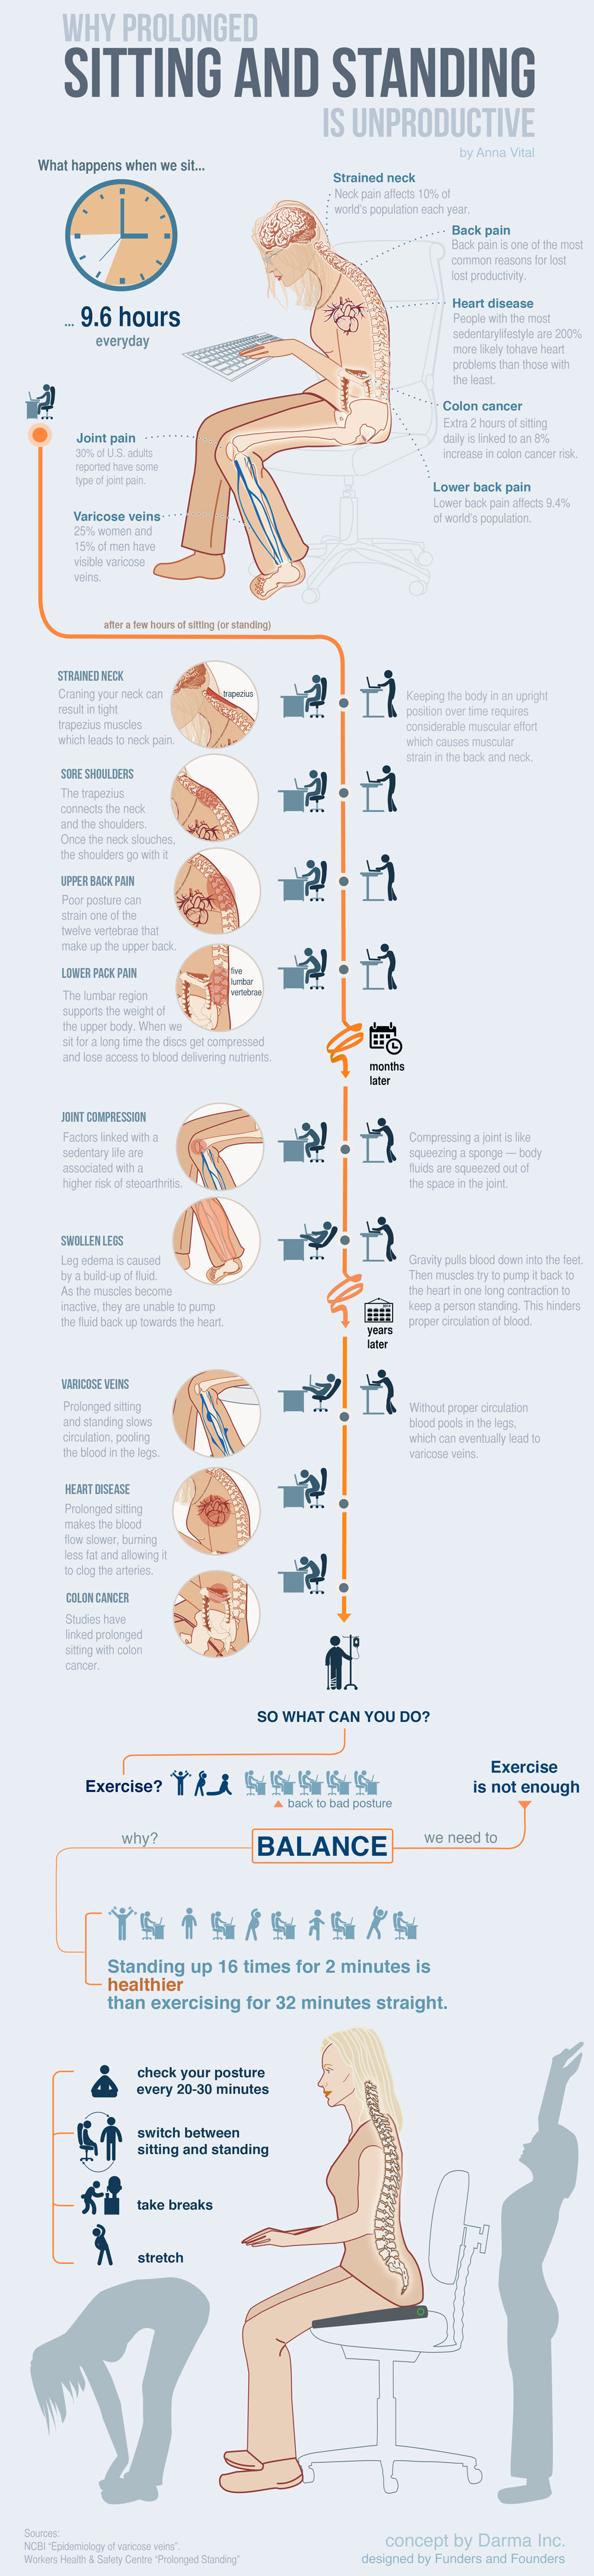 Why prolonged sitting and standing is unproductive infographic